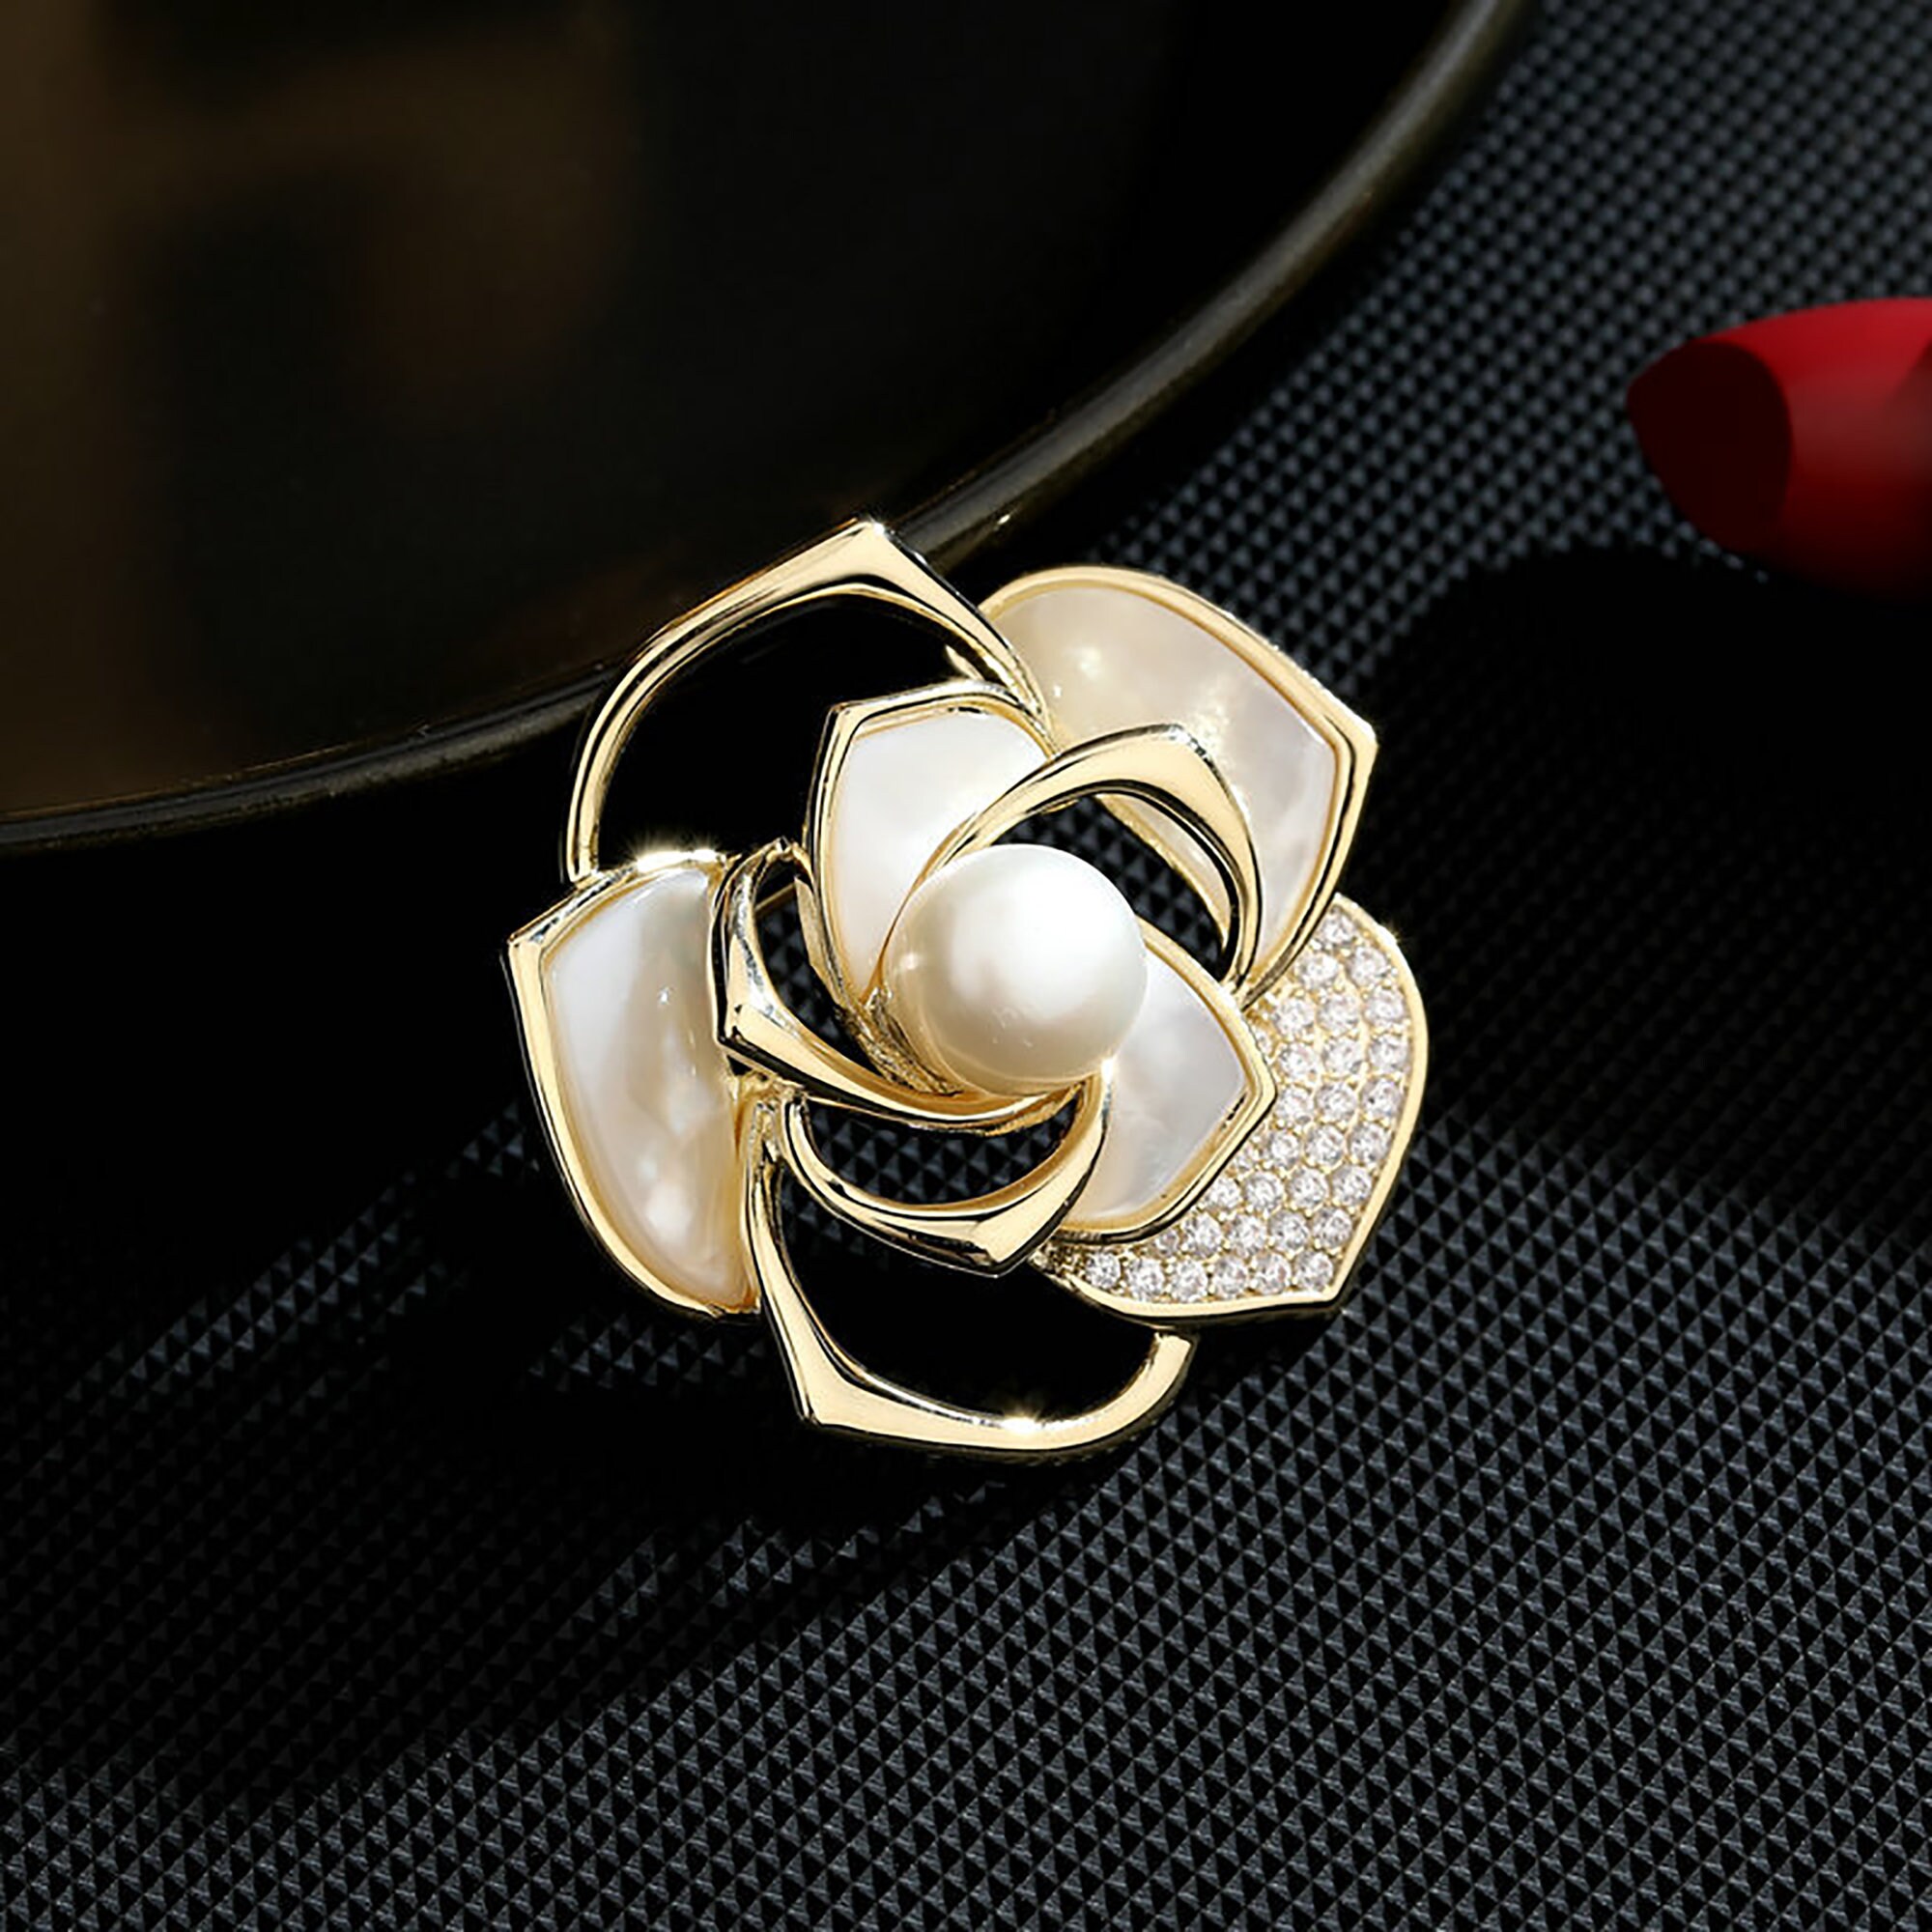 Buy Chanel Brooch Gold Online In India -  India